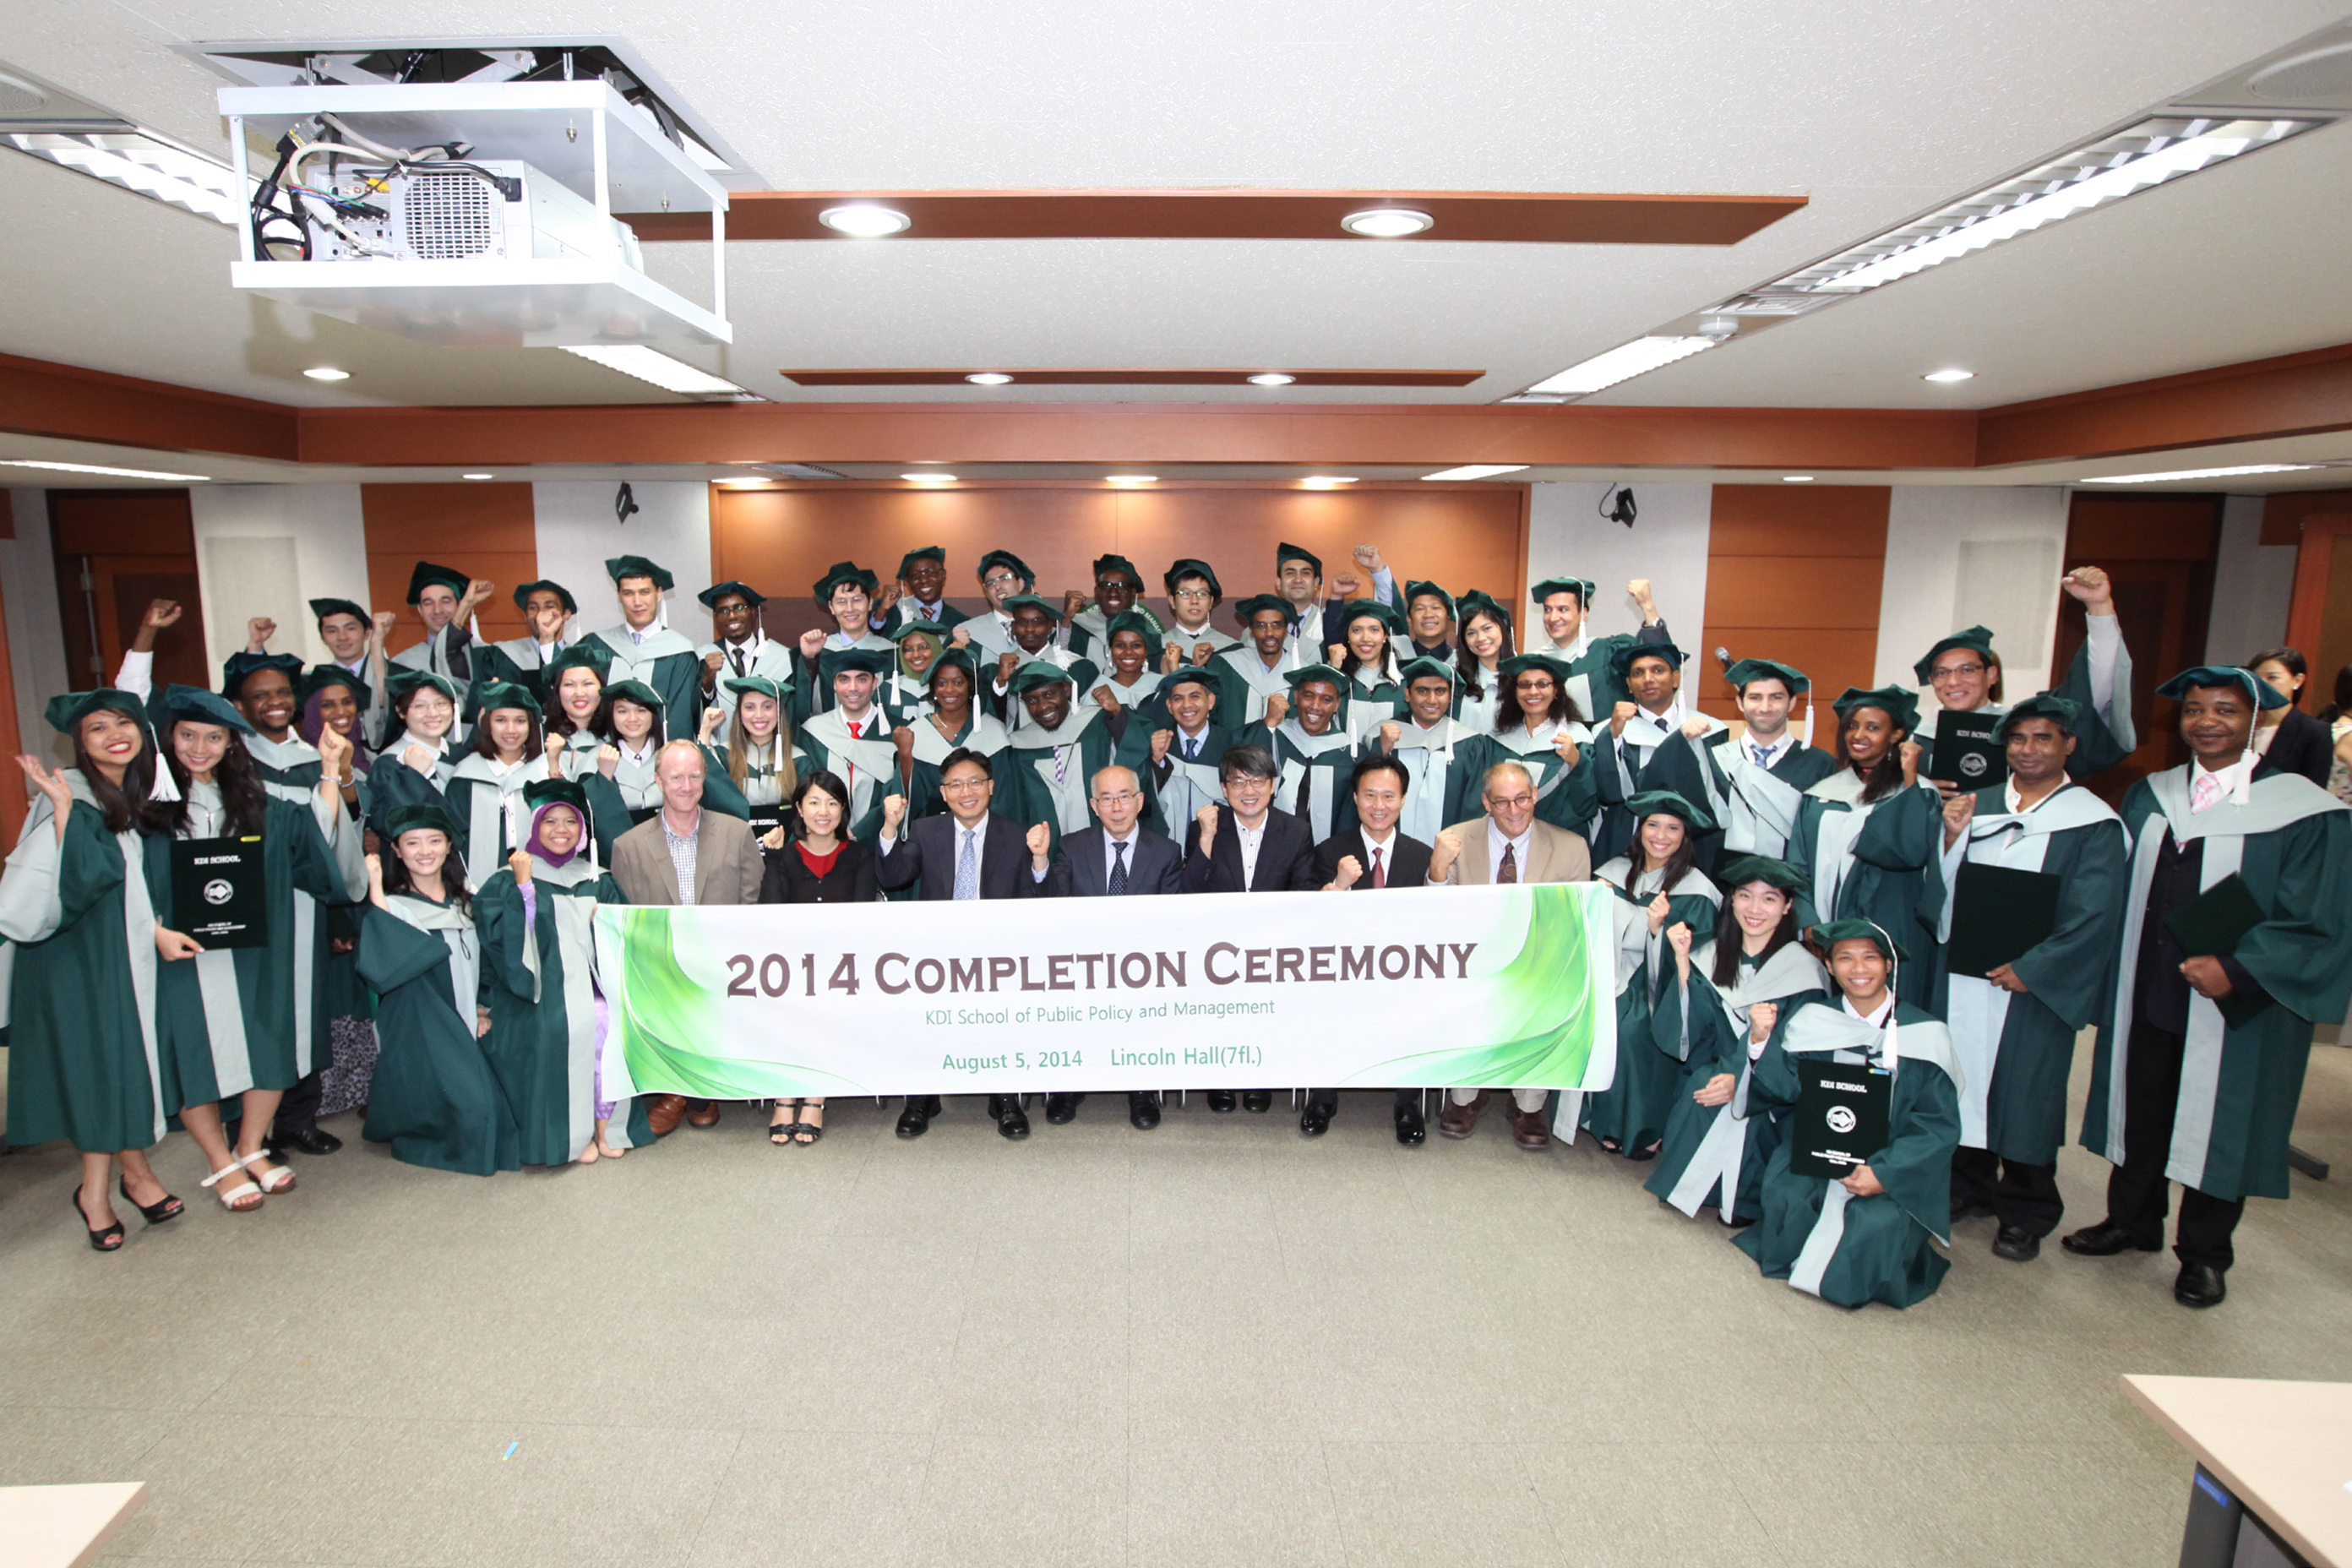 2014 Completion Ceremony: be ready to shape the world